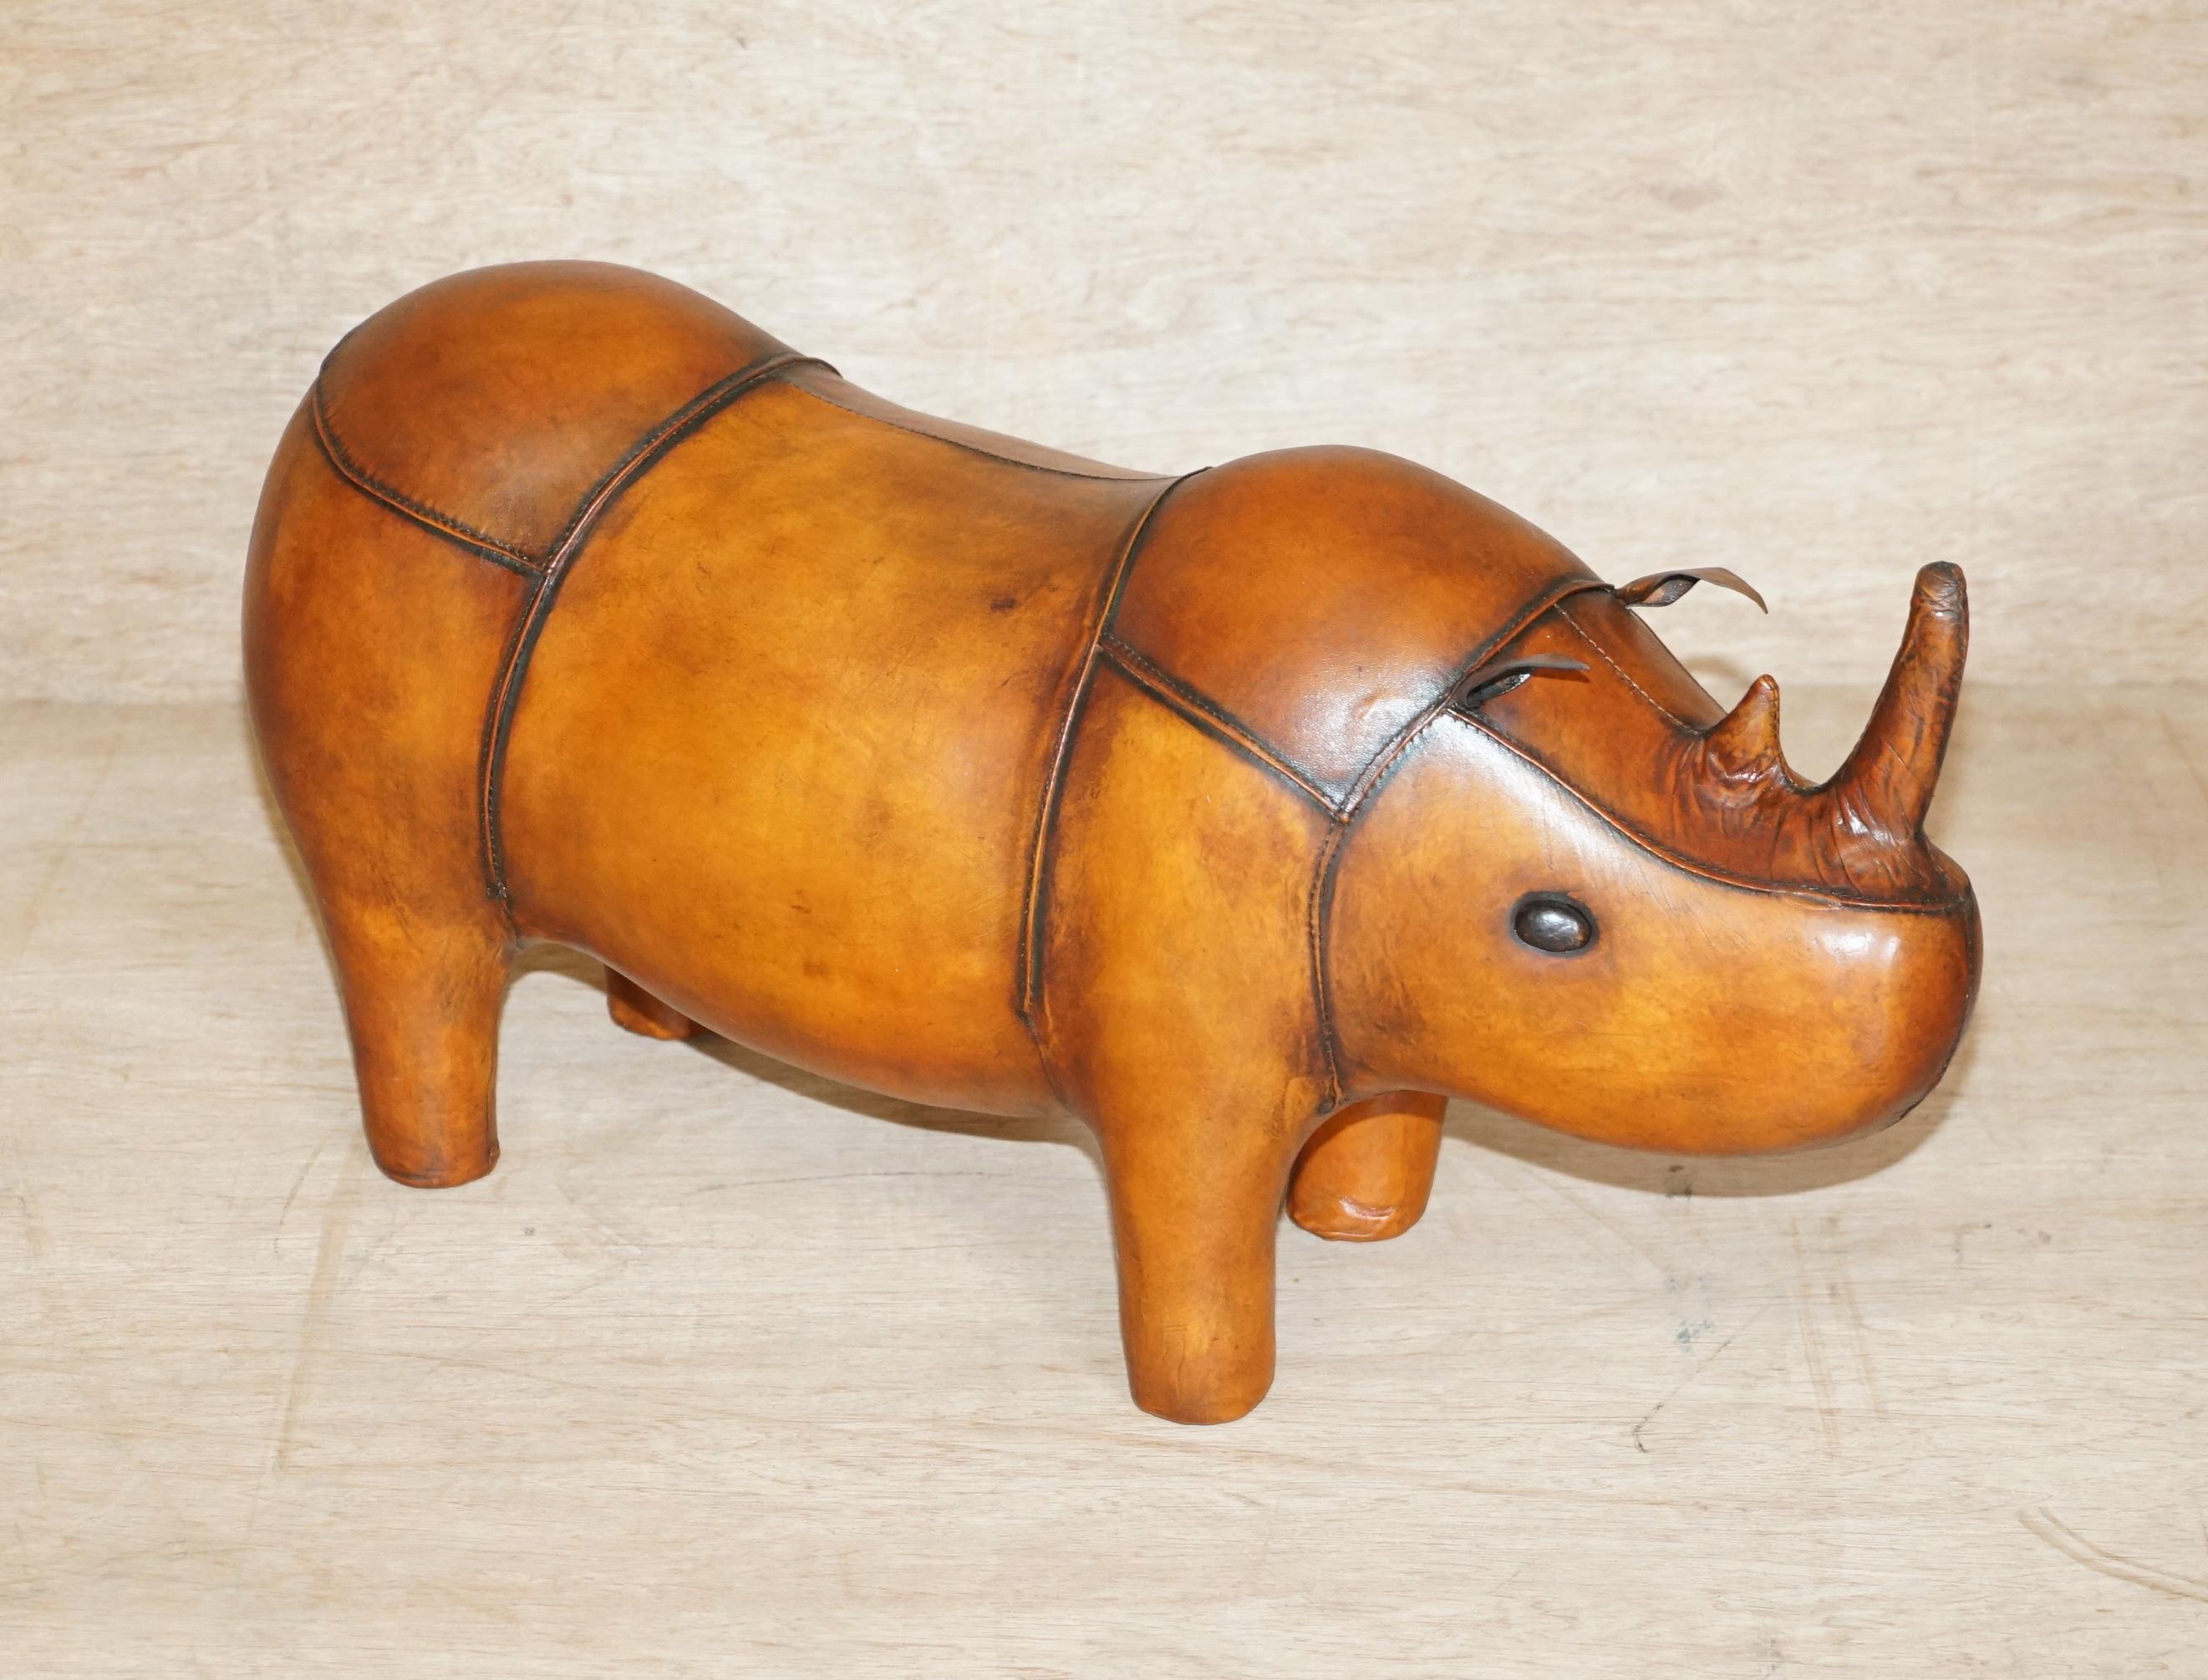 Royal House Antiques is delighted to 1 of 2 absolutely sublime new old stock original Liberty’s London Omersa style brown leather hand dyed Rhino footstools

This listing is for one with the option to buy up to two 

These come in varying sizes